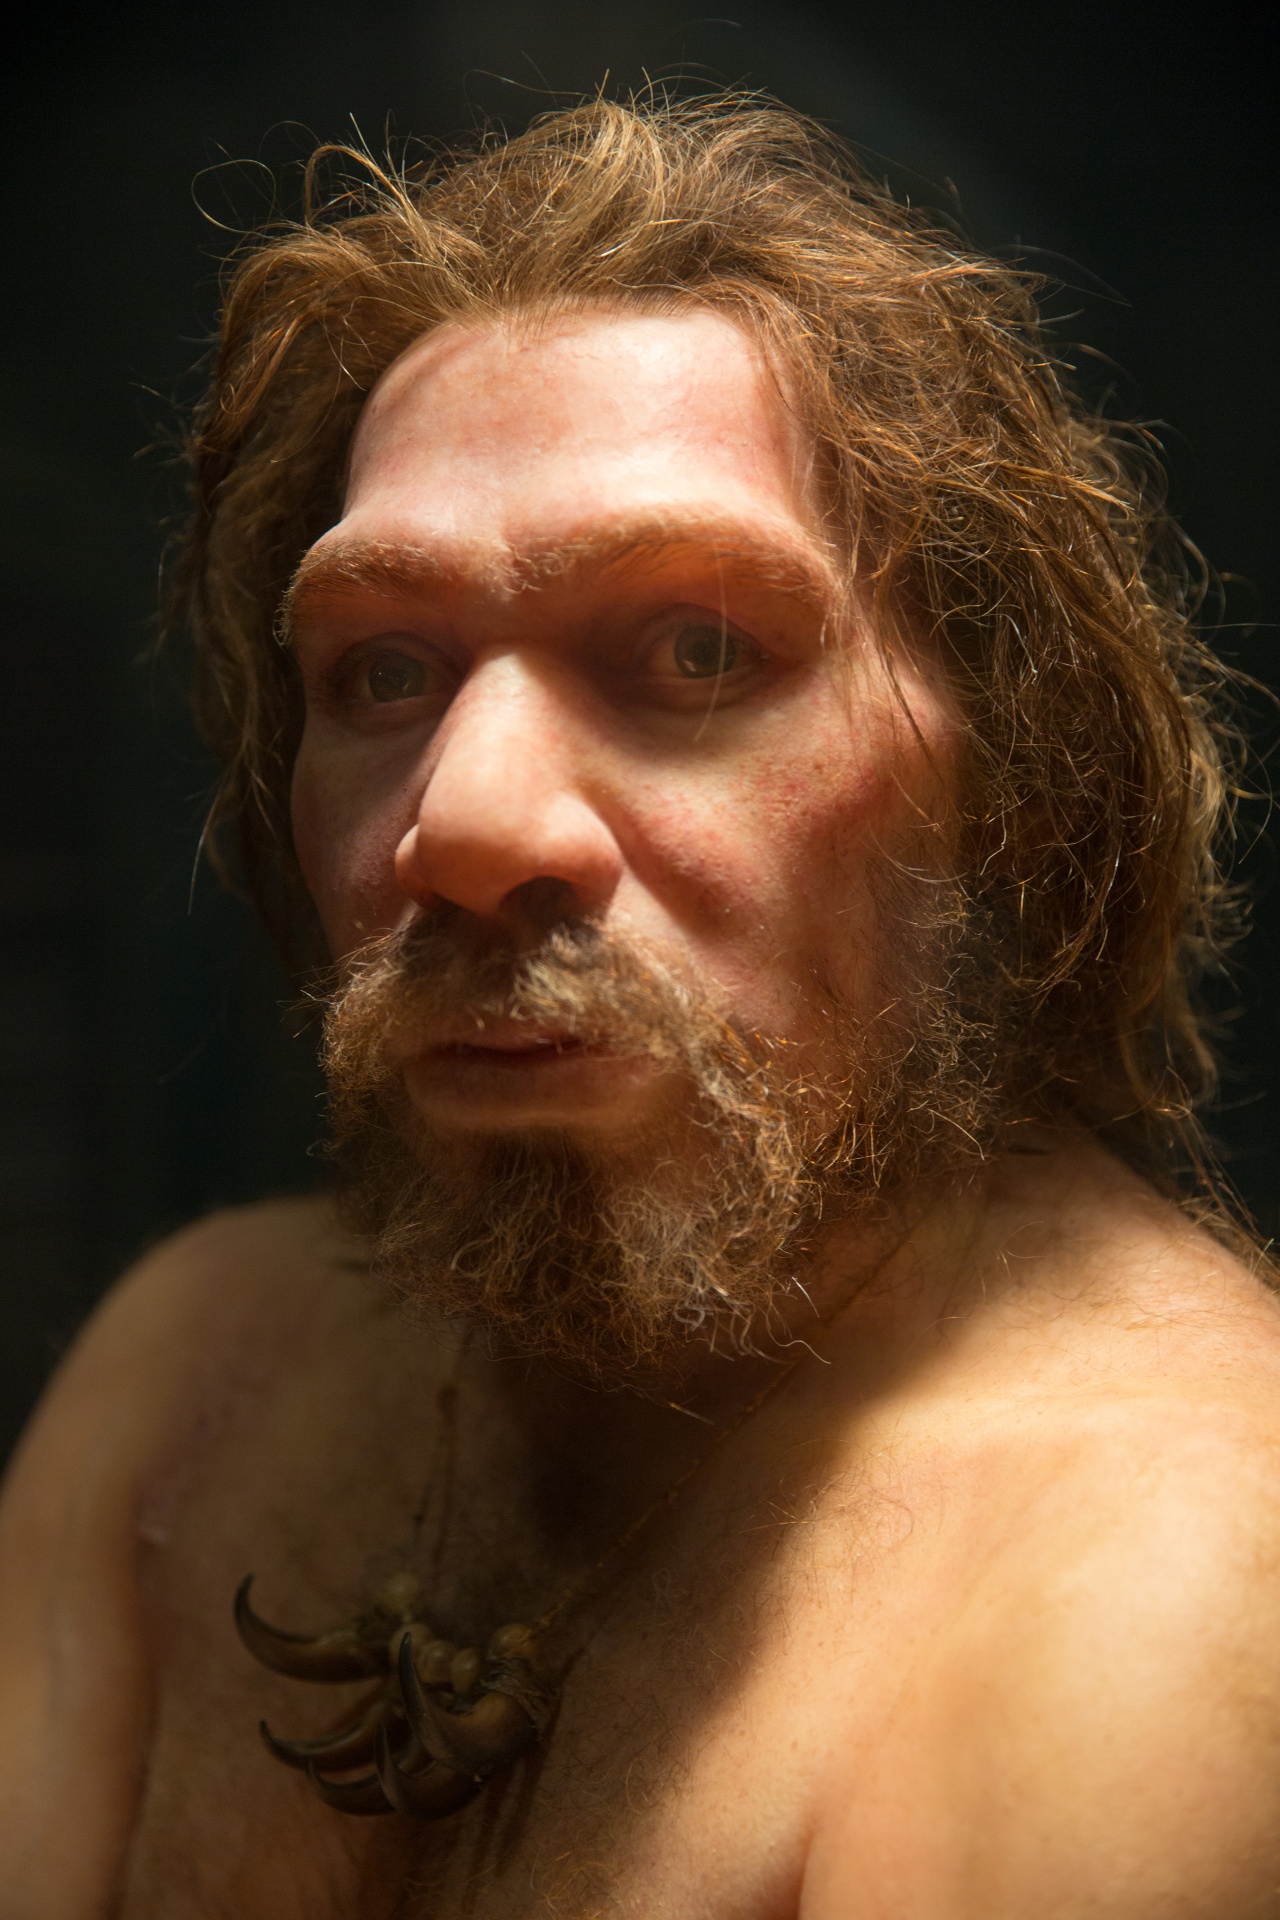 A portrait of a neanderthal in a museum.